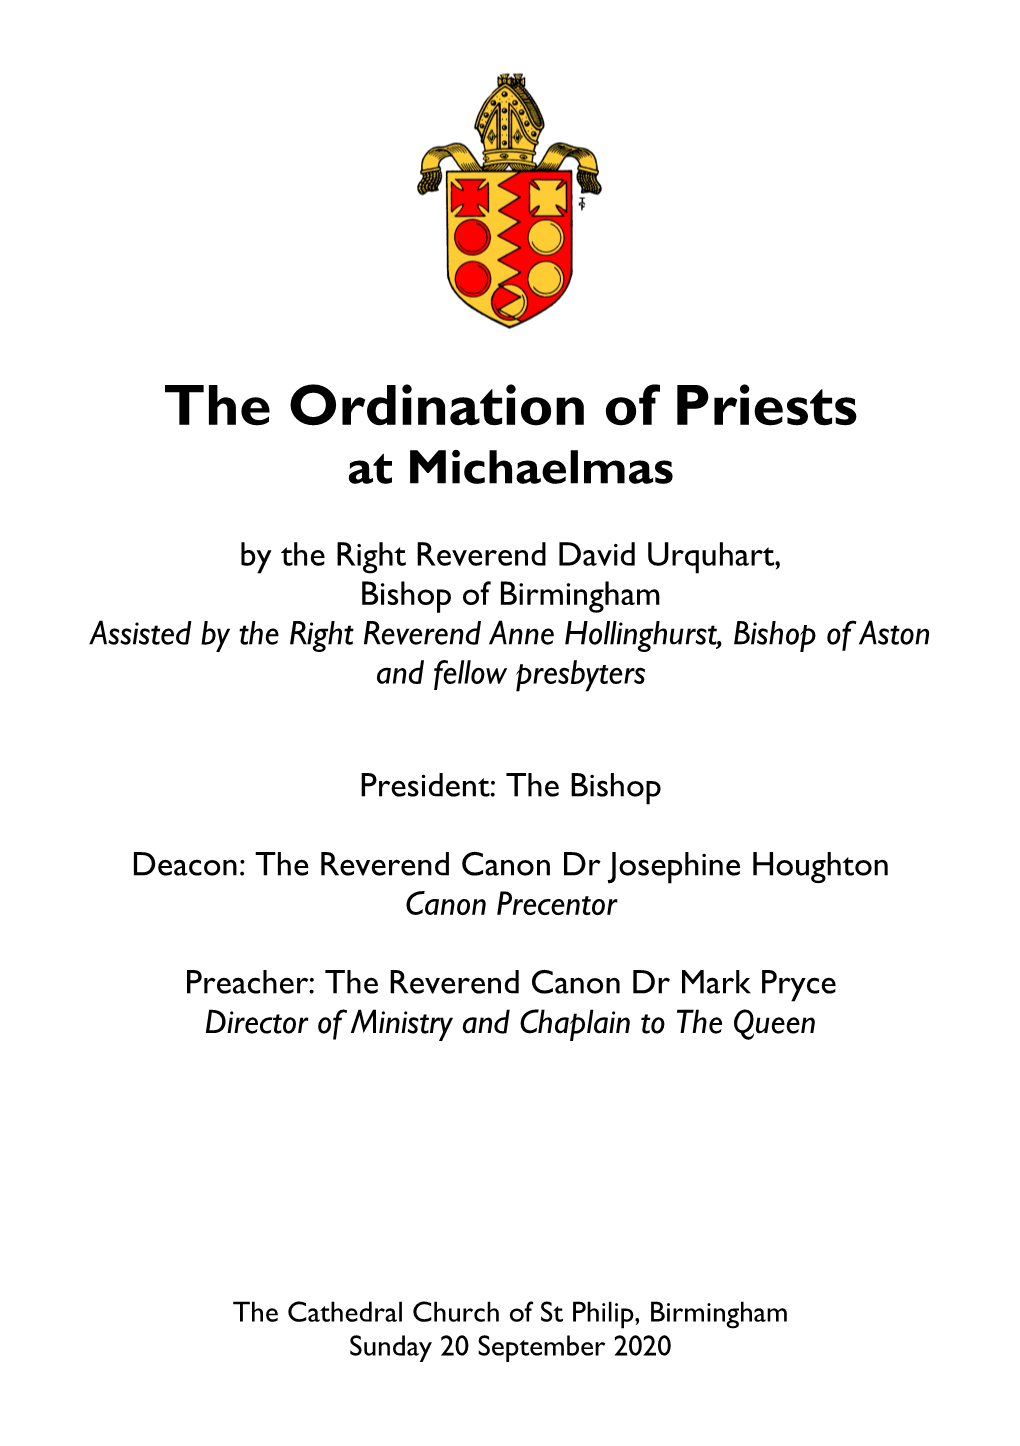 The Ordination of Priests at Michaelmas